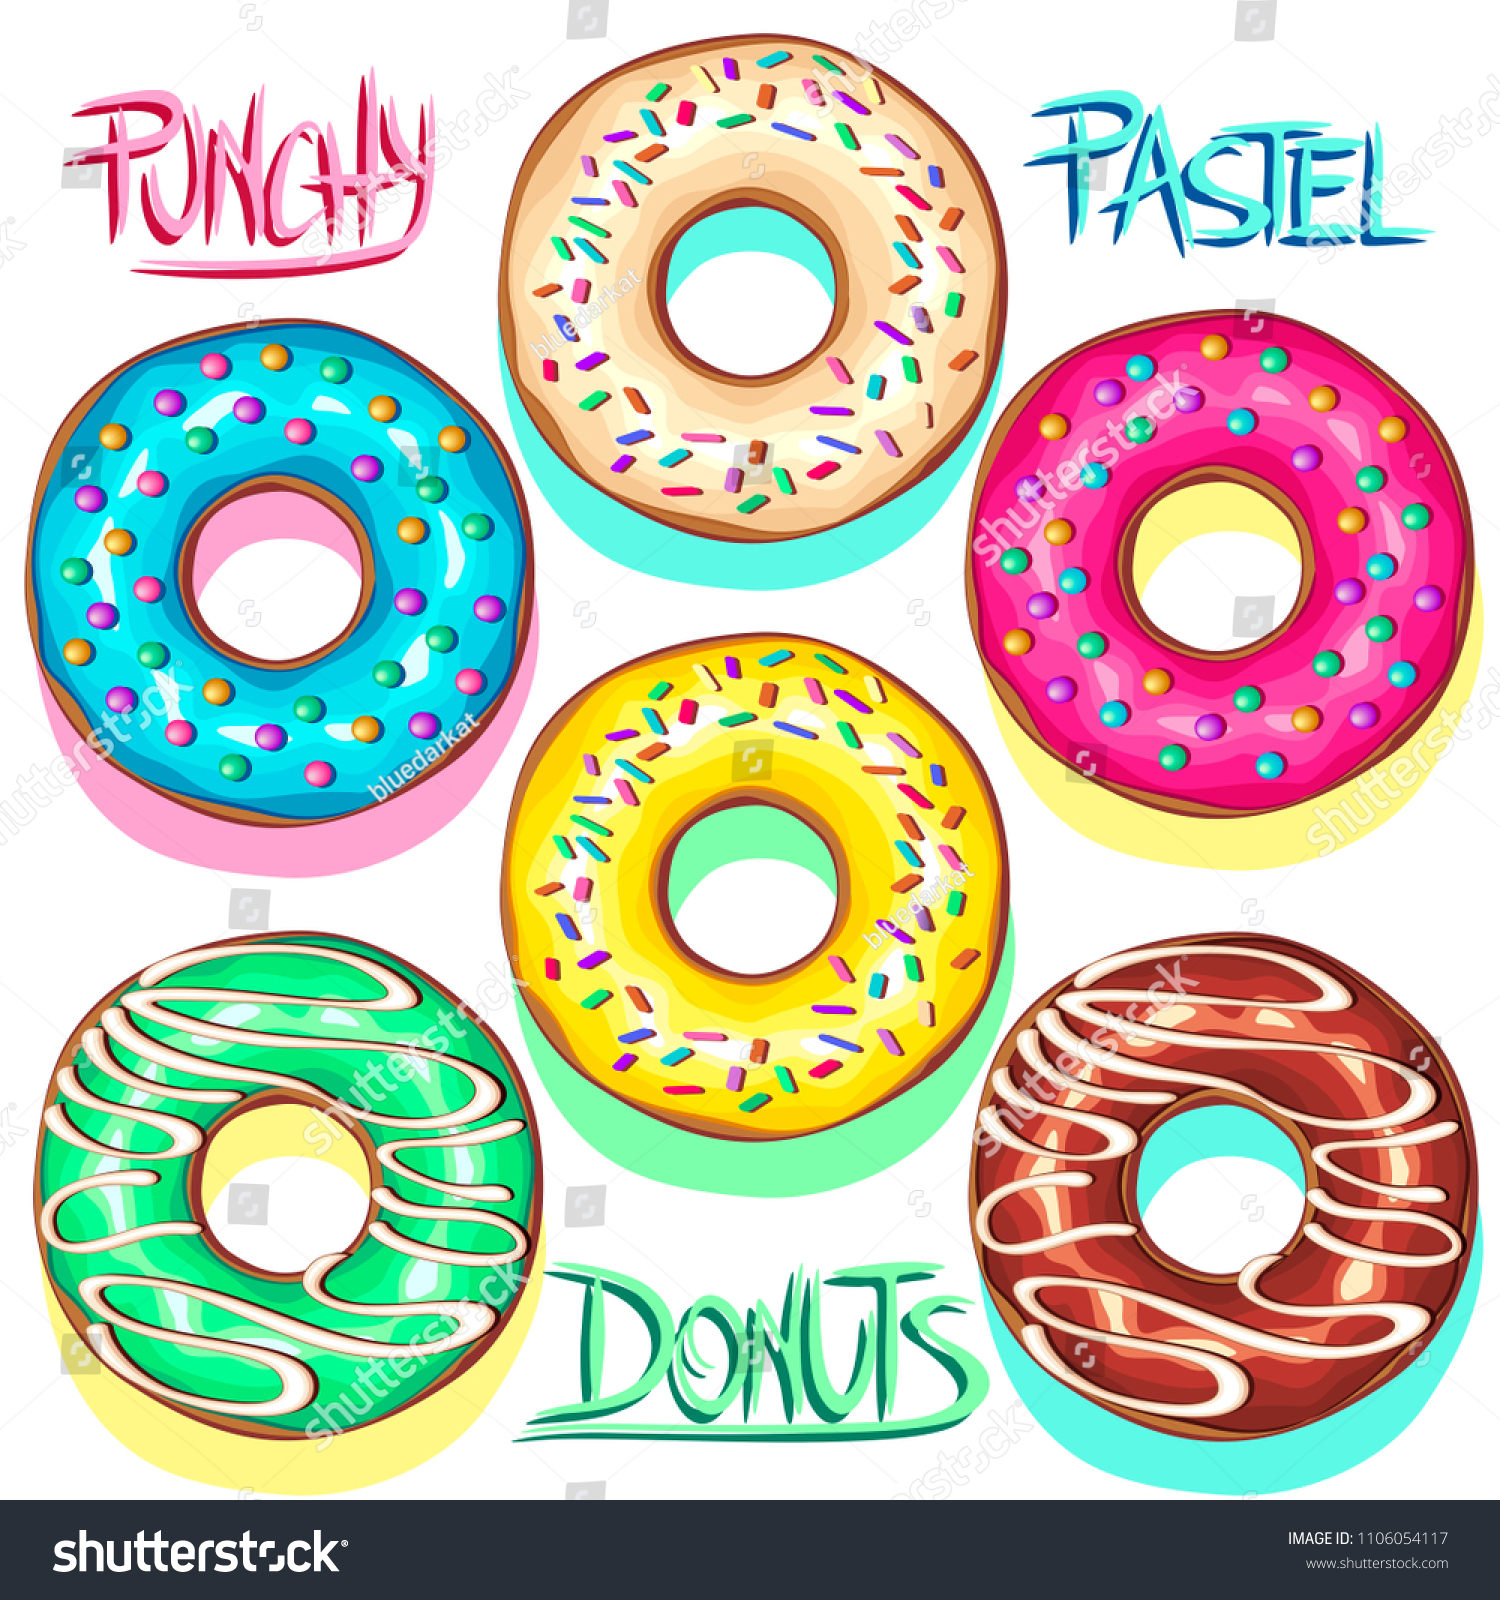 Set of Colorful Punchy Pastel Donuts, showcasing Color trends like Baby Blue, Yellow Mellow, Pink. Delicious and Creamy, and also with Chocolate